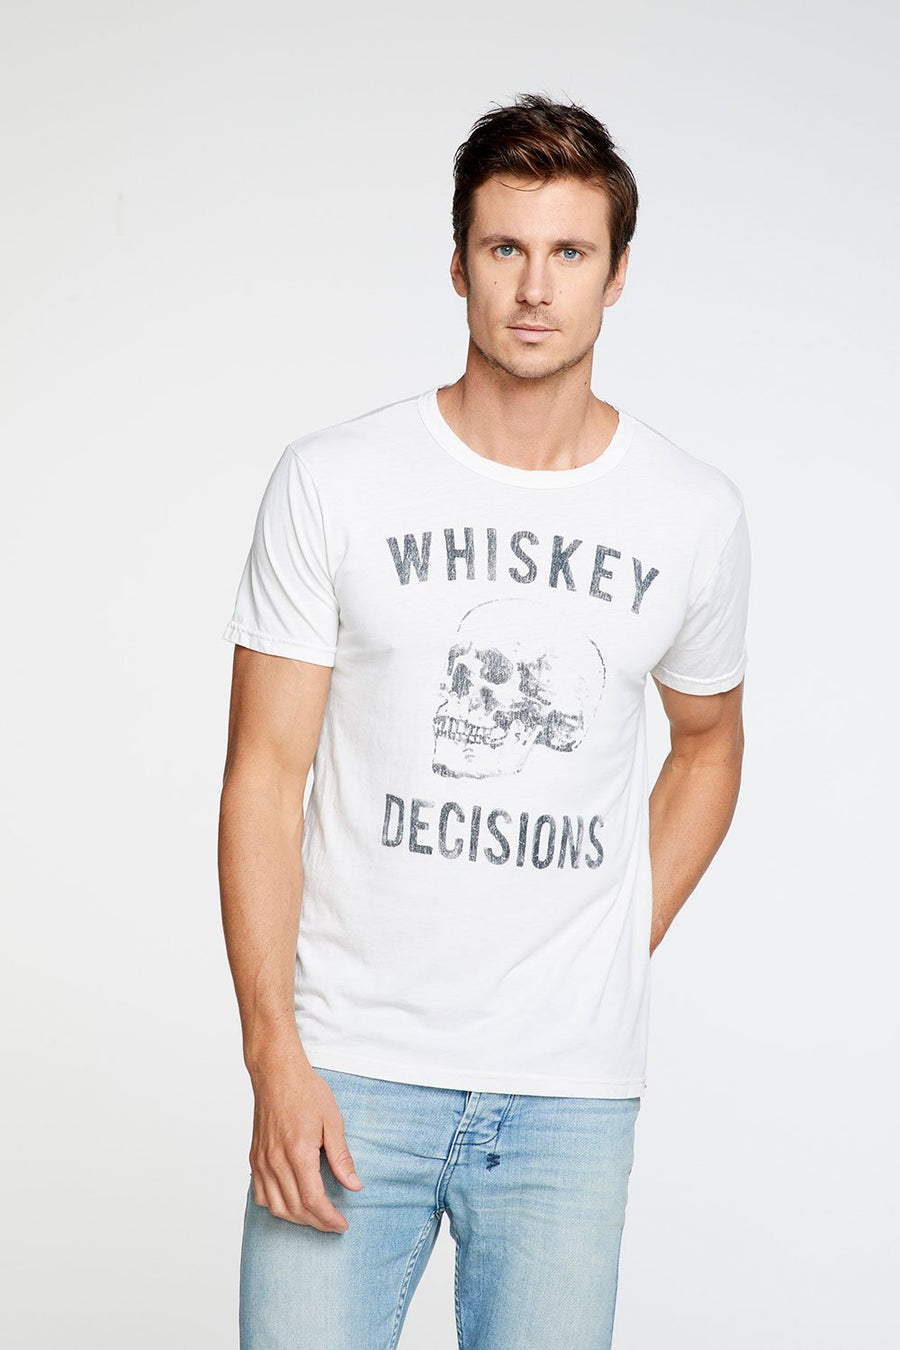 Whiskey Decisions Tee | Salt - West of Camden